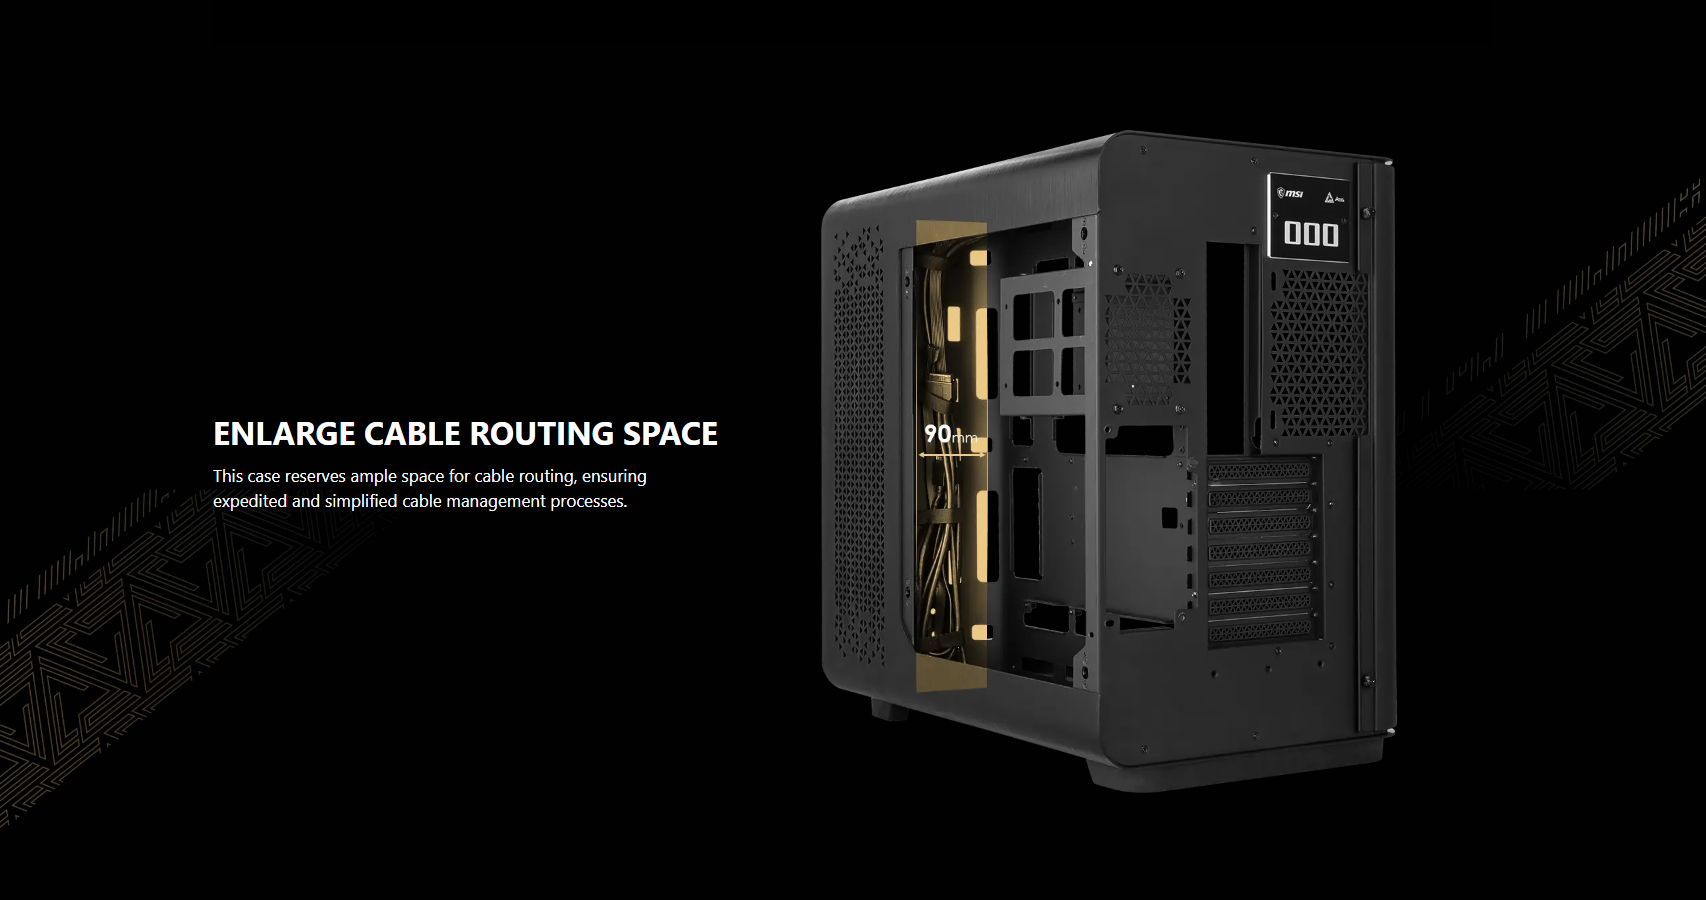 This case reserves ample space for cable routing, ensuring expedited and simplified cable management processes.